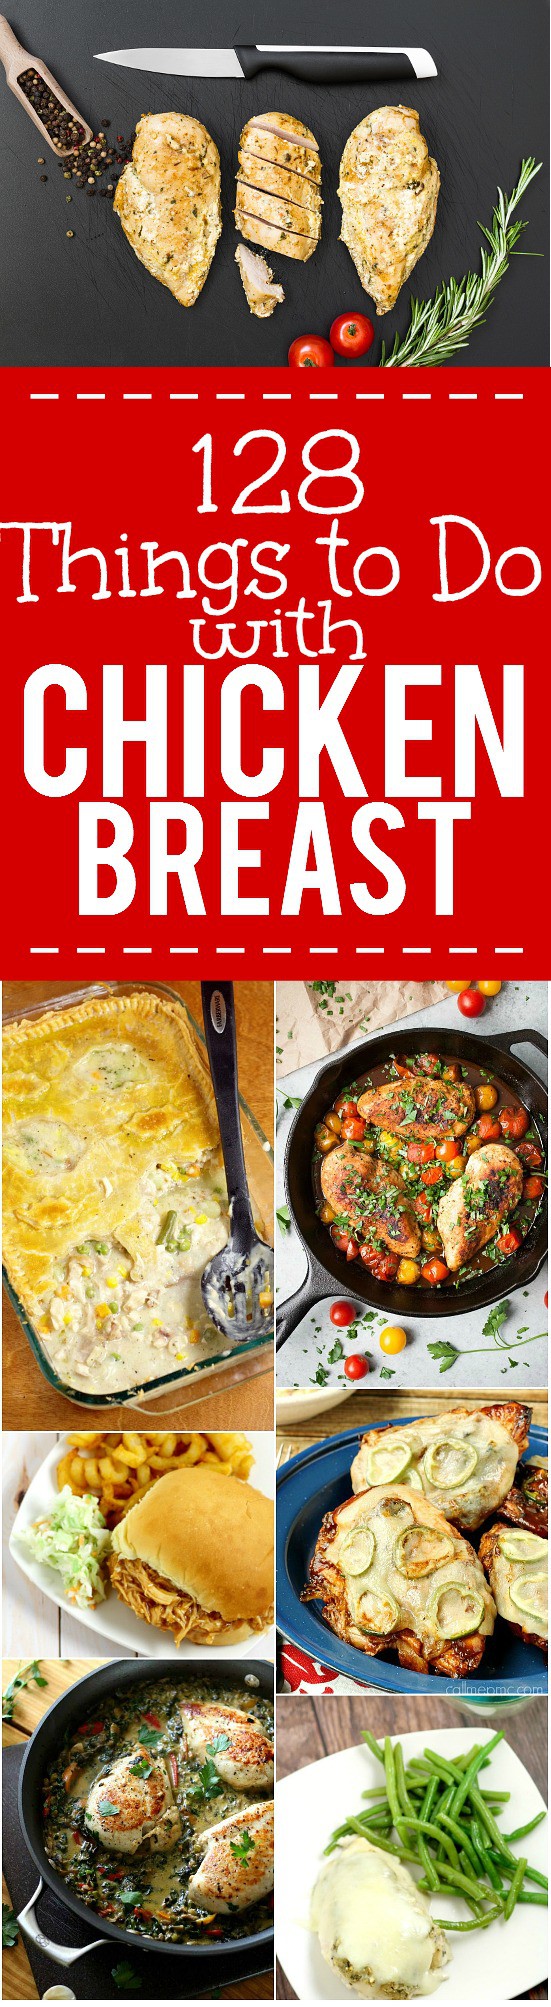 128 Chicken Breast Recipes perfect for using up that chicken breast in your freezer. Epic collection of 128 of the best quick, easy, and delicious Chicken Breast Recipes from soups and salads to entrees and casseroles.  No more boring chicken breast!